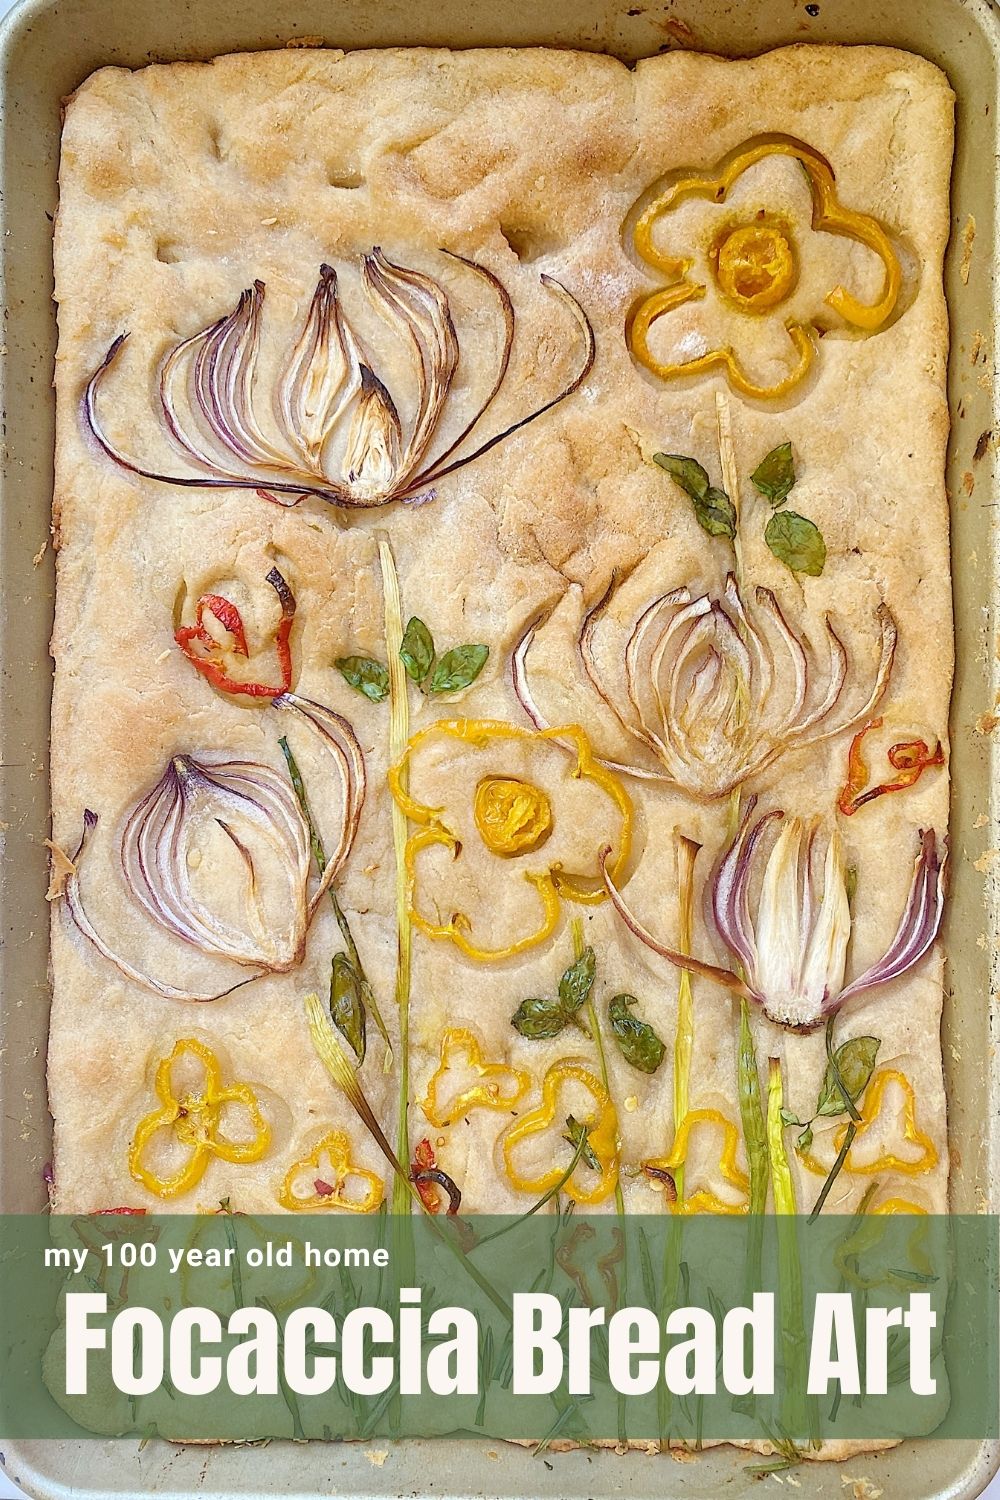 Focaccia Bread Art is a really fun way to decorate the bread with vegetables. Today I made a beautiful Focaccia Garden and I think you are going to like my Gluten-Free Focaccia Bread Recipe.